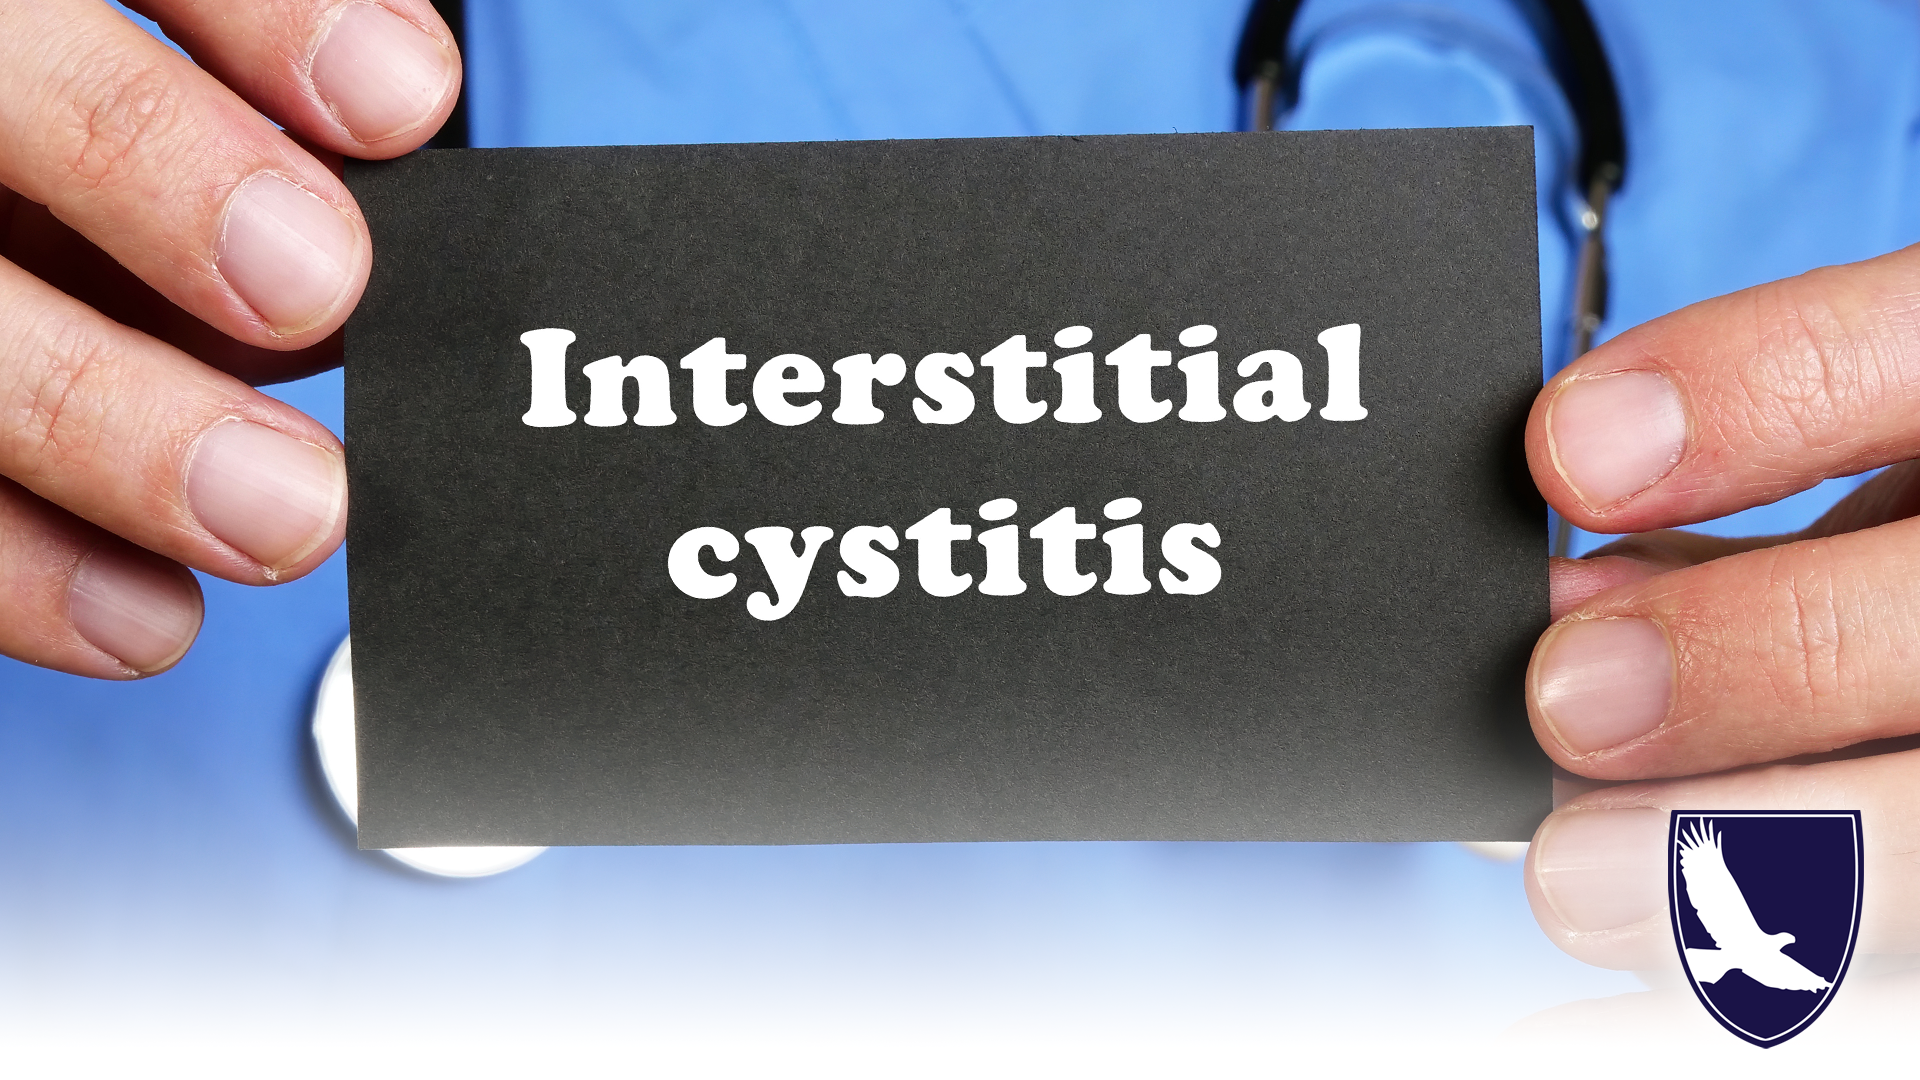 CAN I GET SSDI OR SSI DISABILITY FOR INTERSTITIAL CYSTITIS